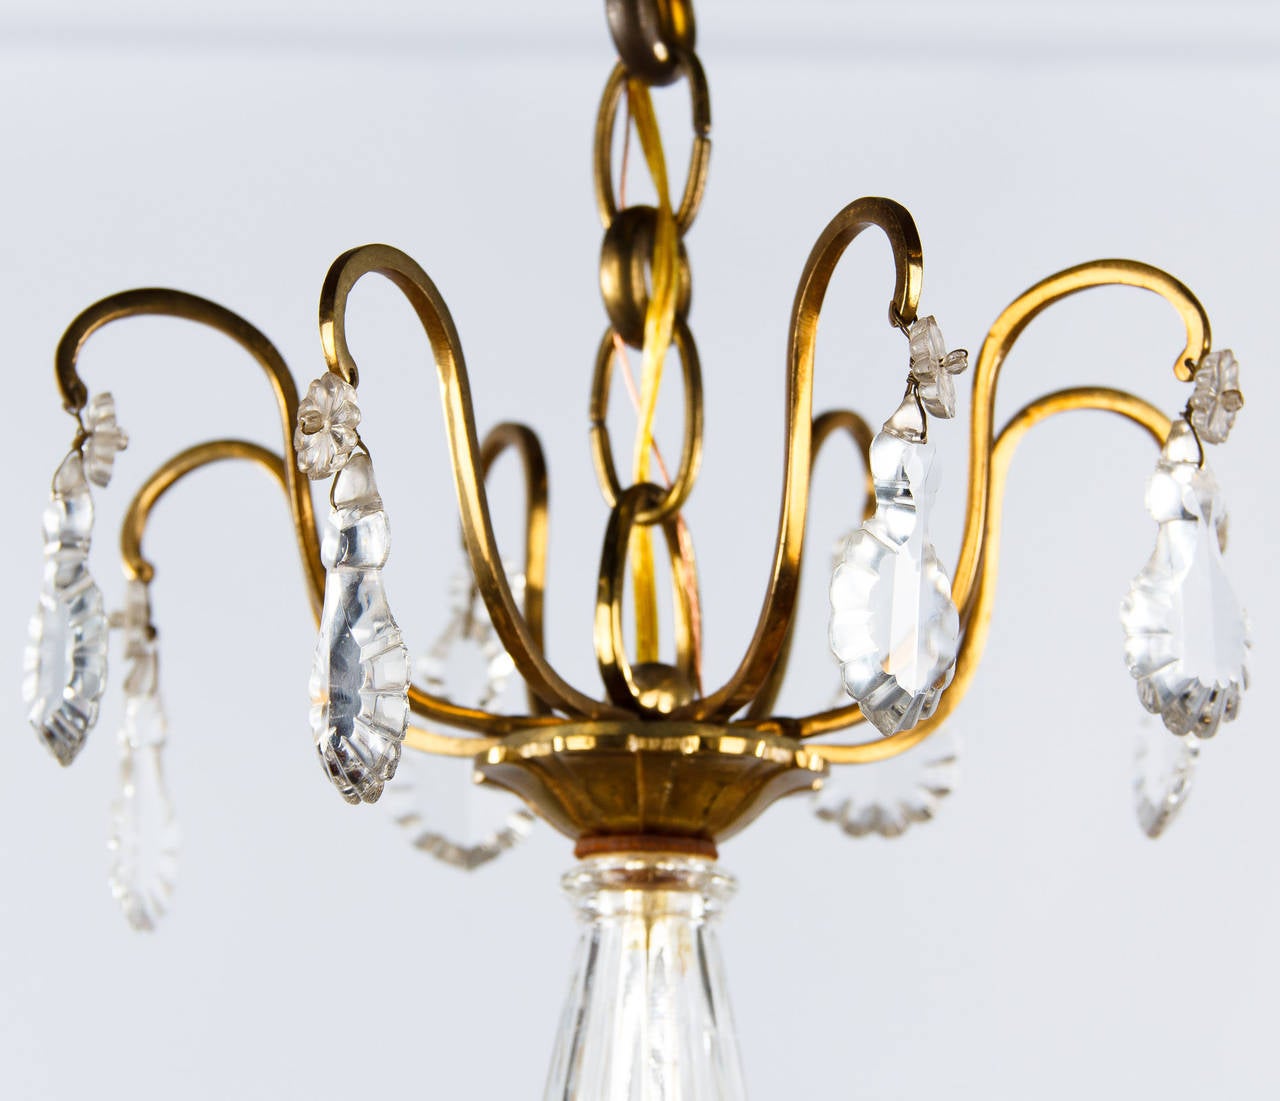 french crystal chandelier